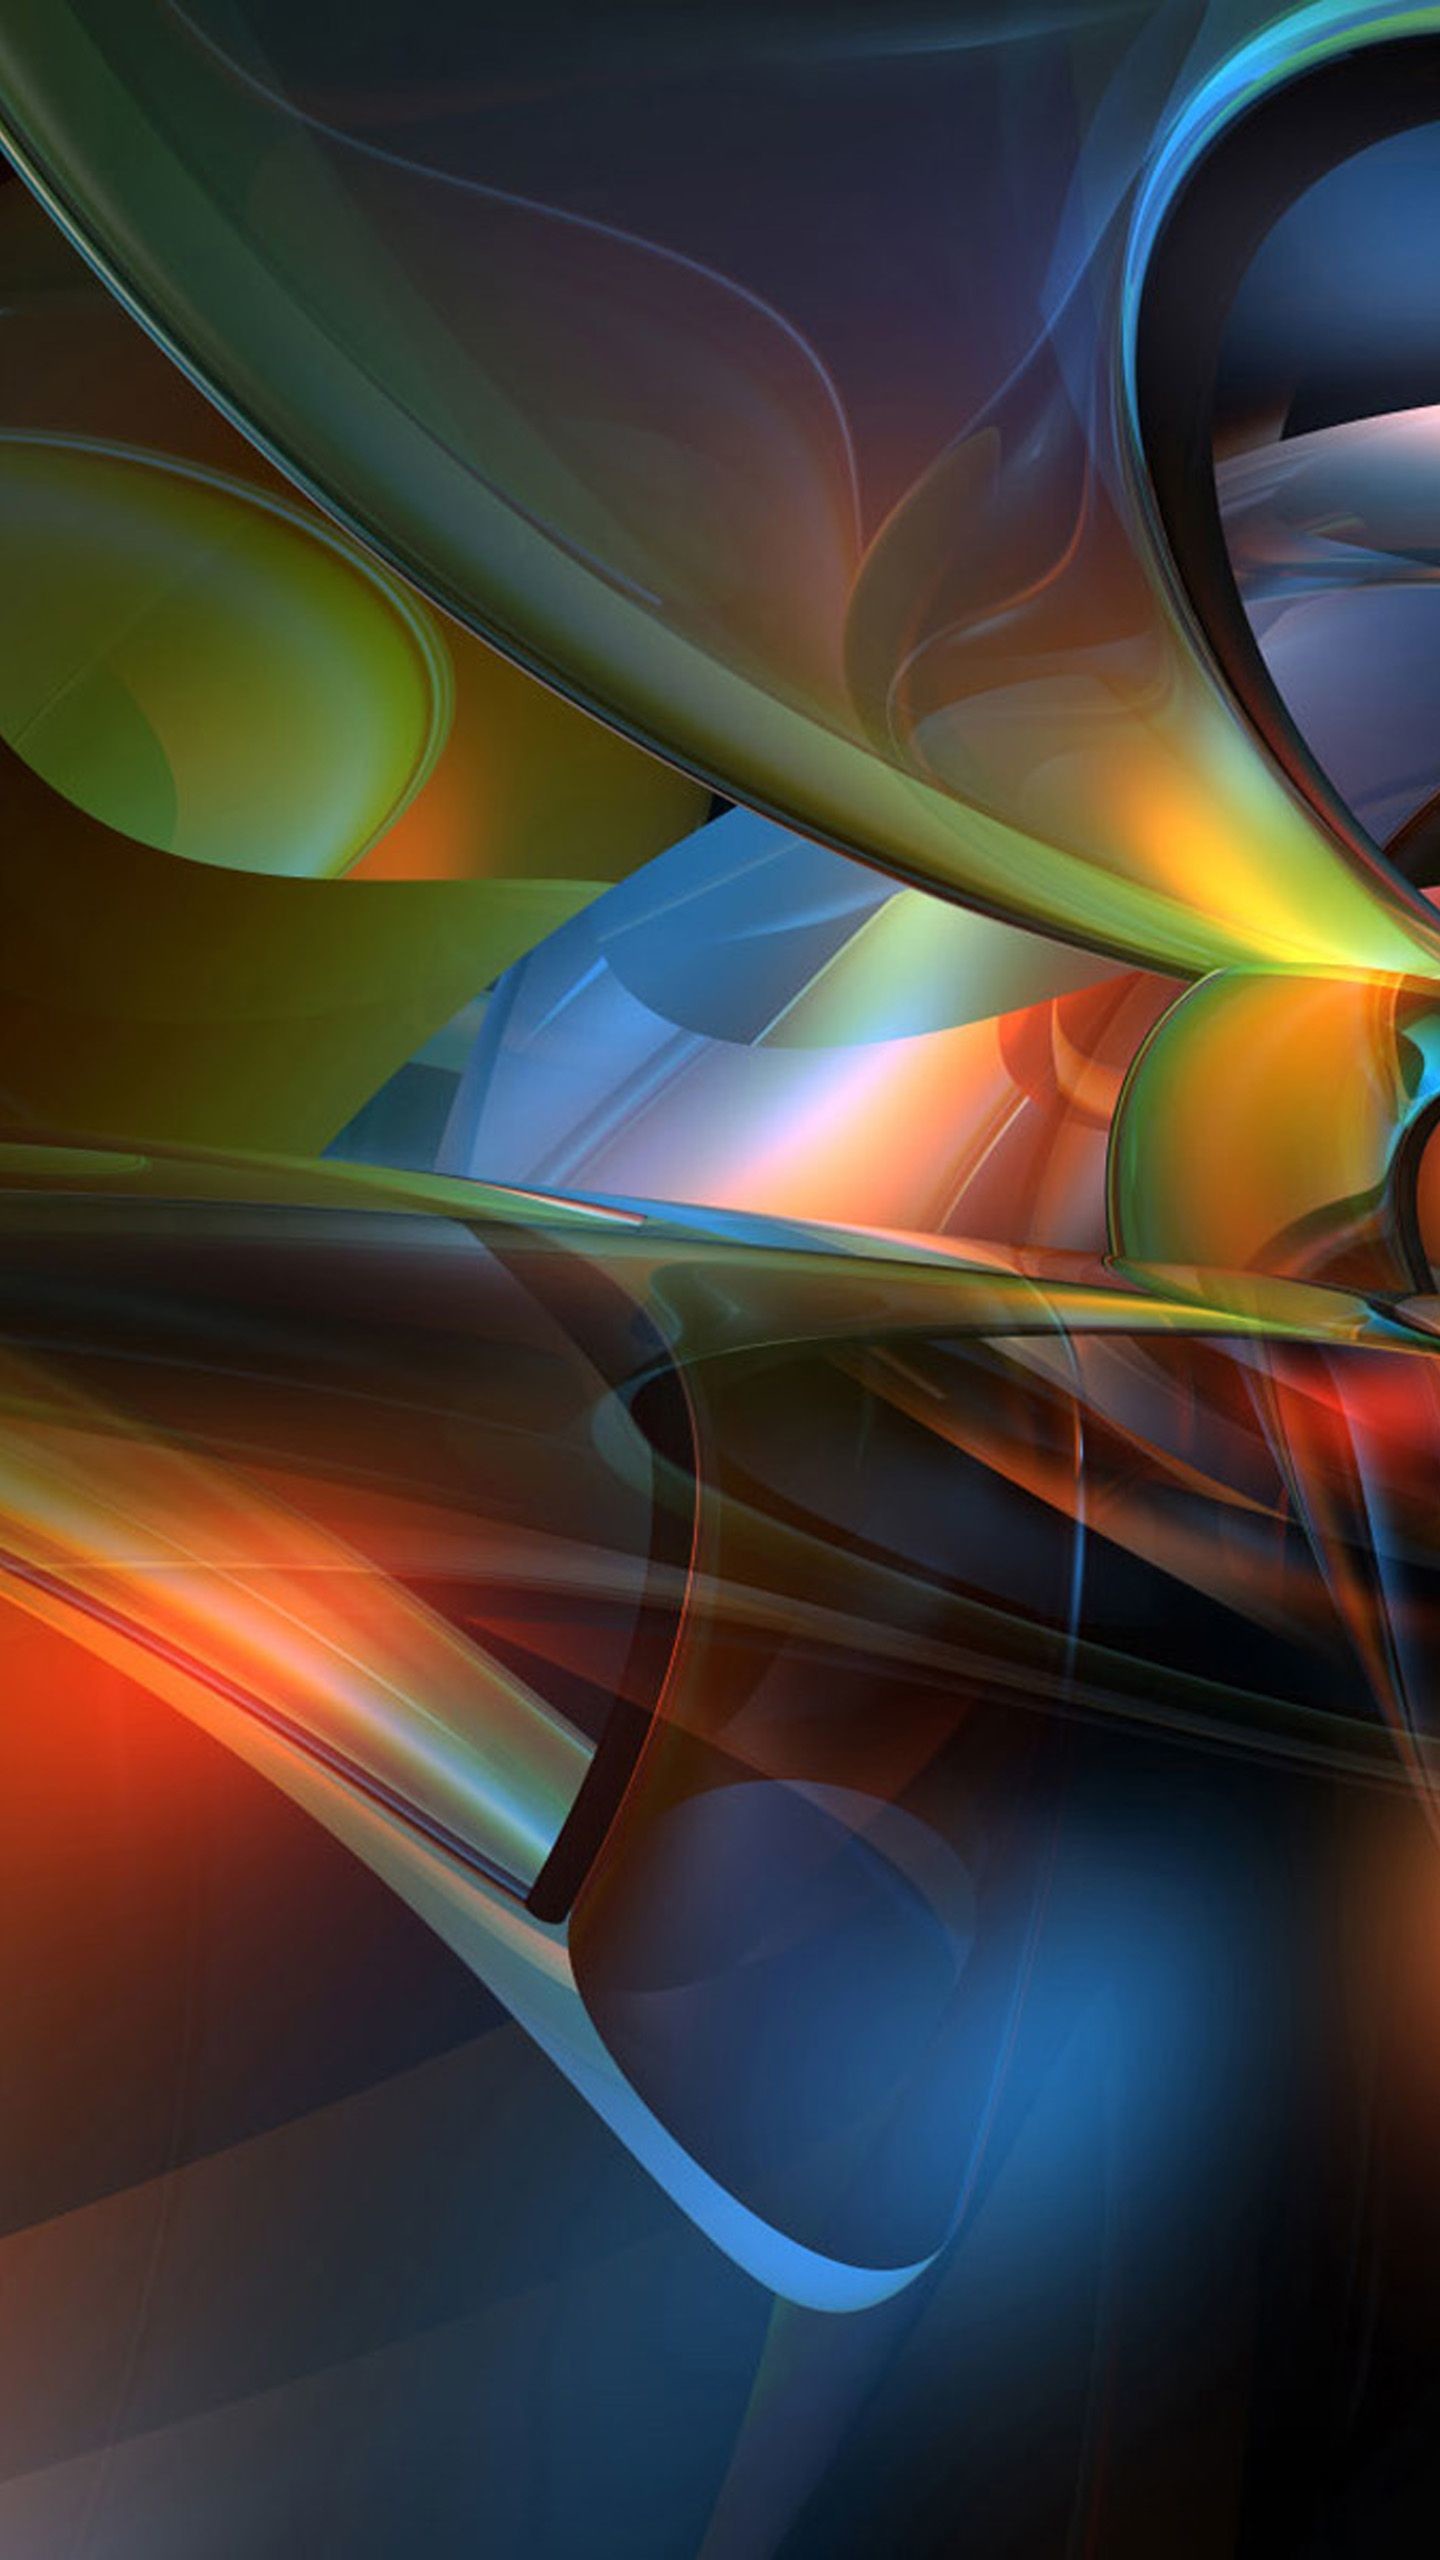 1440x2560 3d Abstract Mobile Phone Wallpaper http://wallpapers-and-backgrounds.net